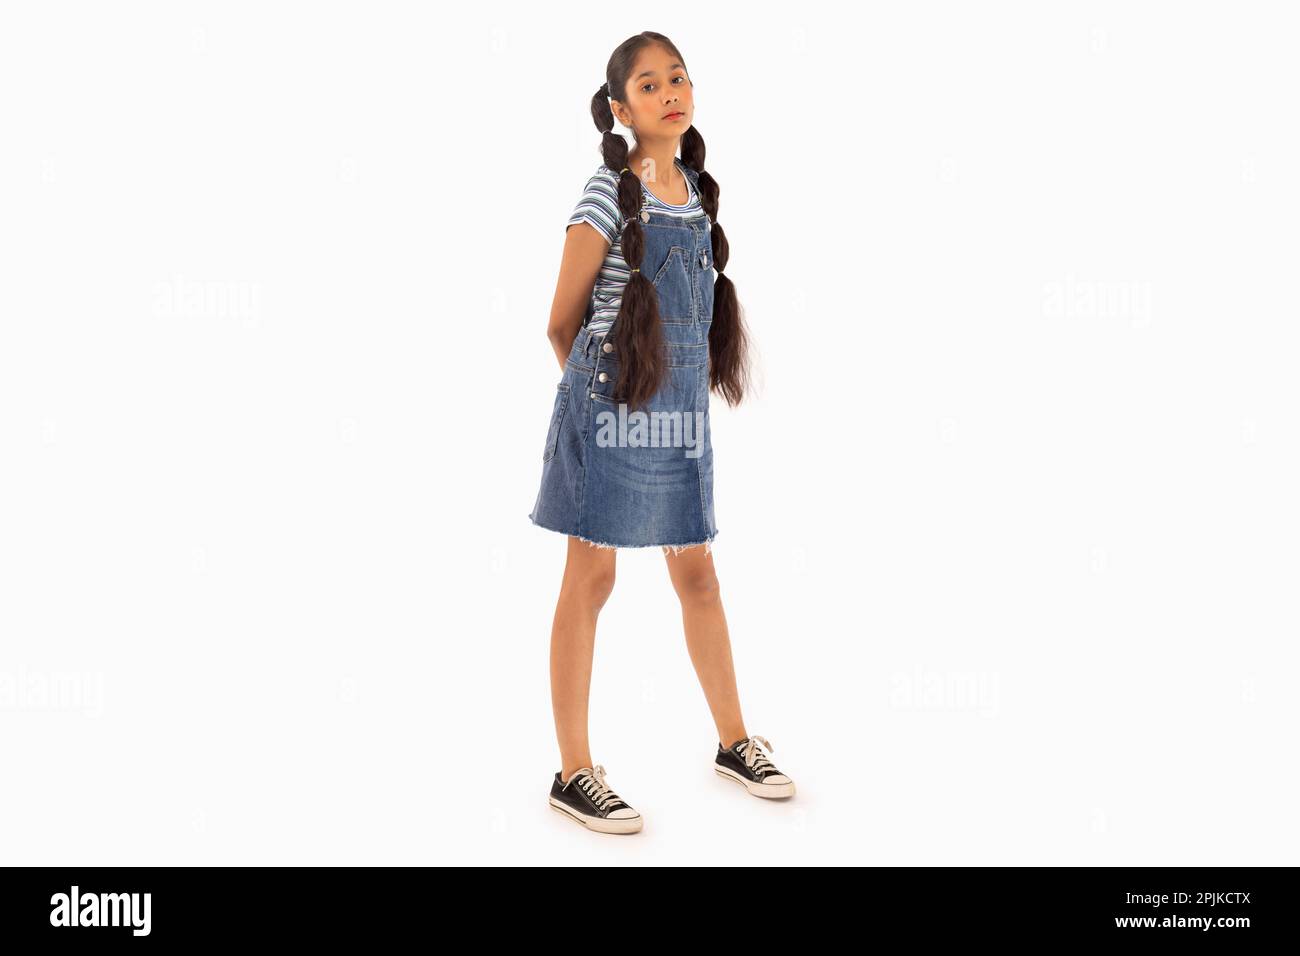 Tween girl with braided hair standing against white background Stock Photo